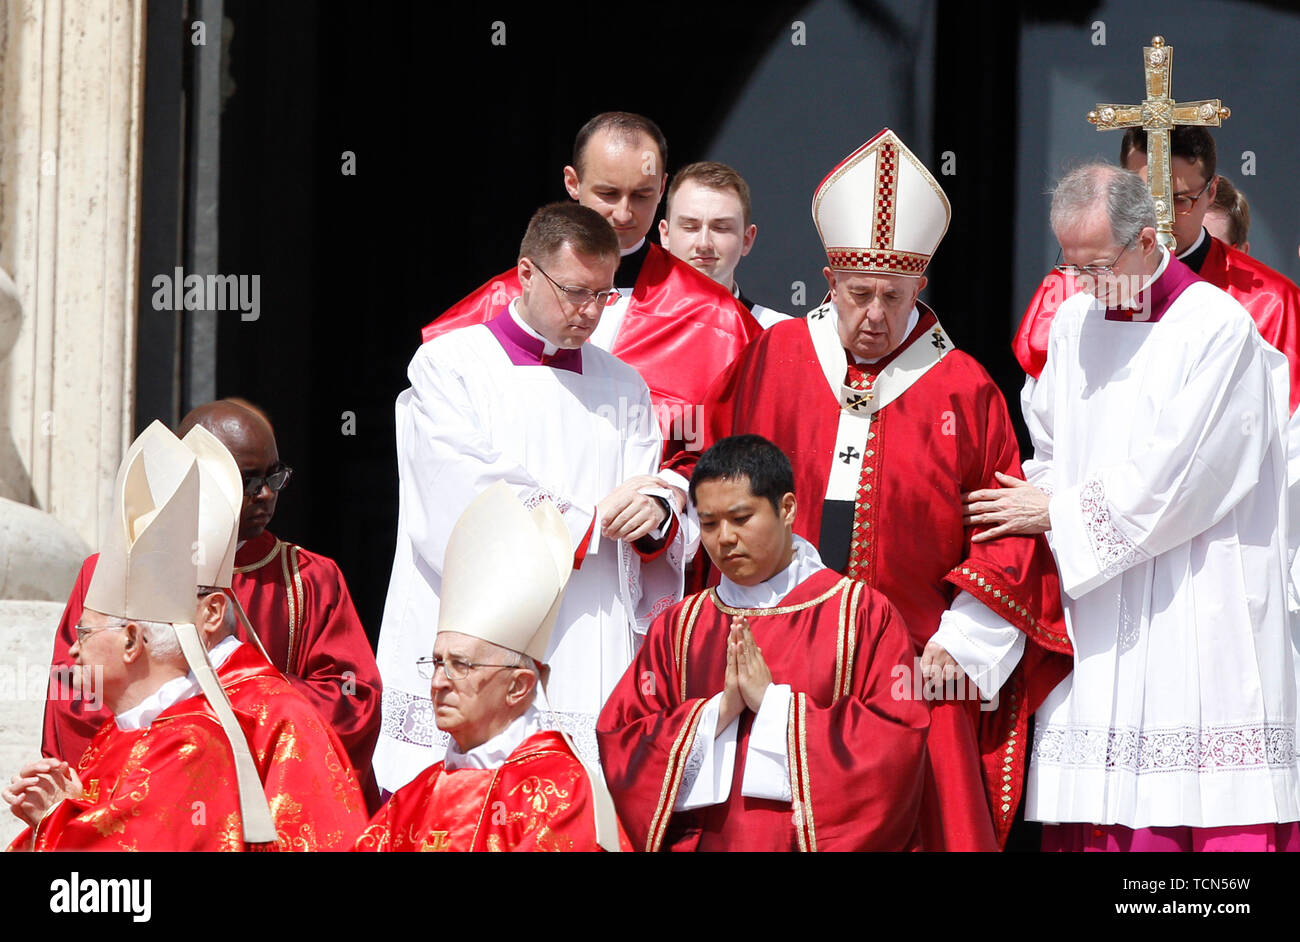 Vatican, Vatican City, Italy. 9th June 2019. Pope Francis celebrates the Pentecost mass in St. Peter's Square. Credit: Riccardo De Luca -Update Images/Alamy Live News Credit: Update Images/Alamy Live News Stock Photo